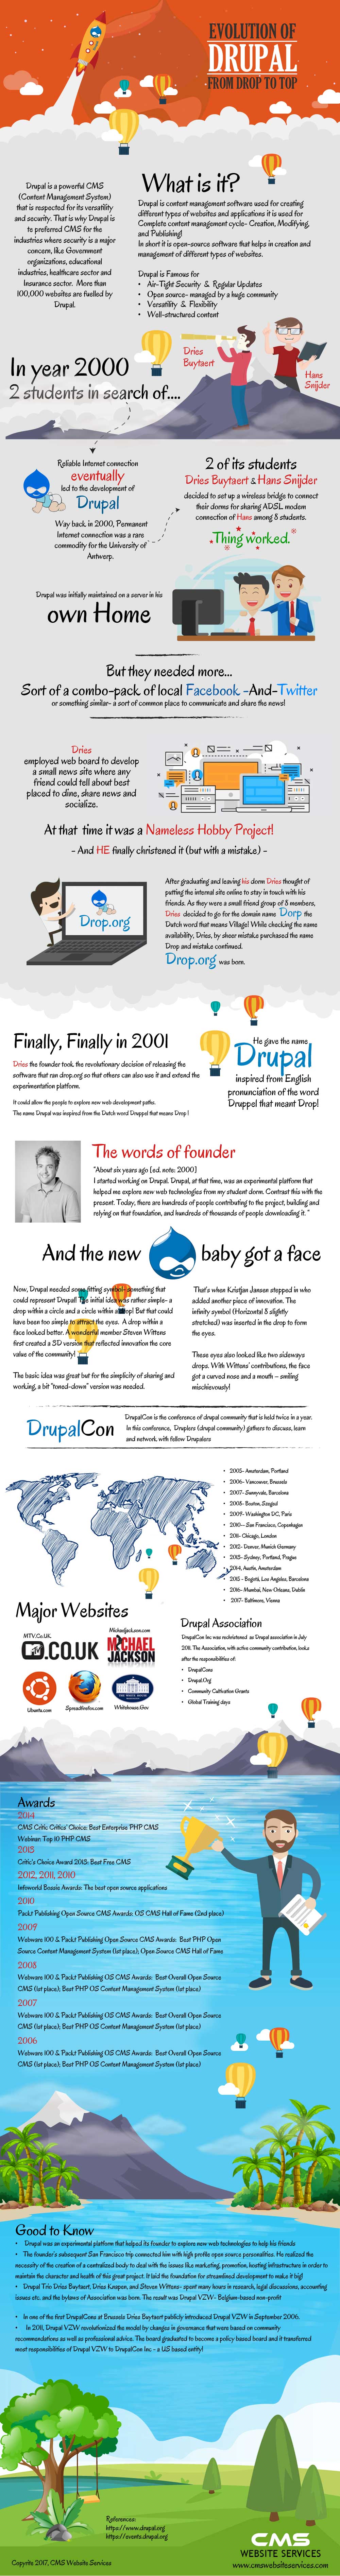 Evolution-Or-Drupal-From-Drop-To-Top